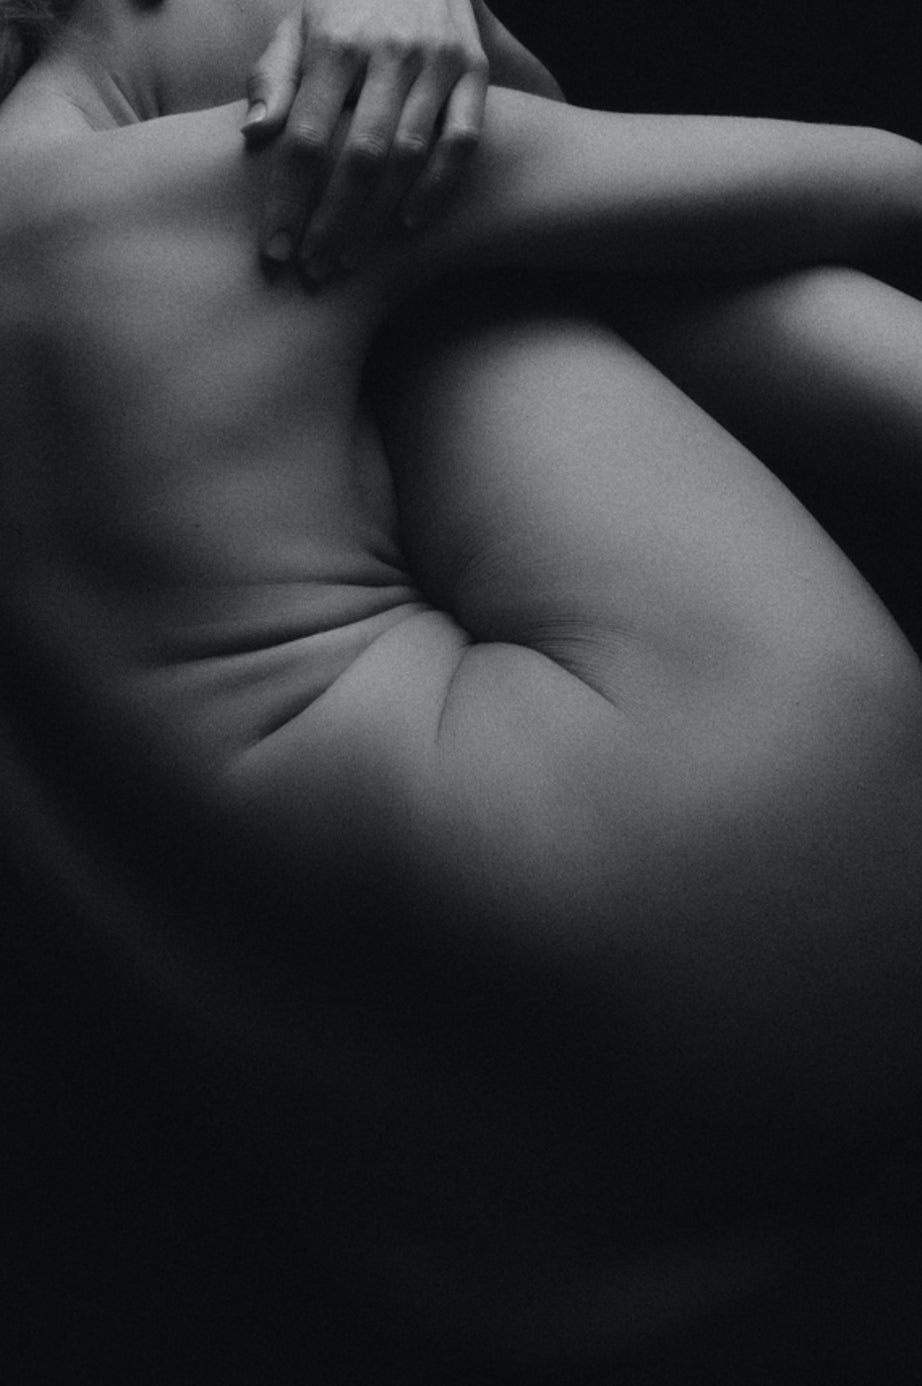 black and white image of a naked woman hugging herself